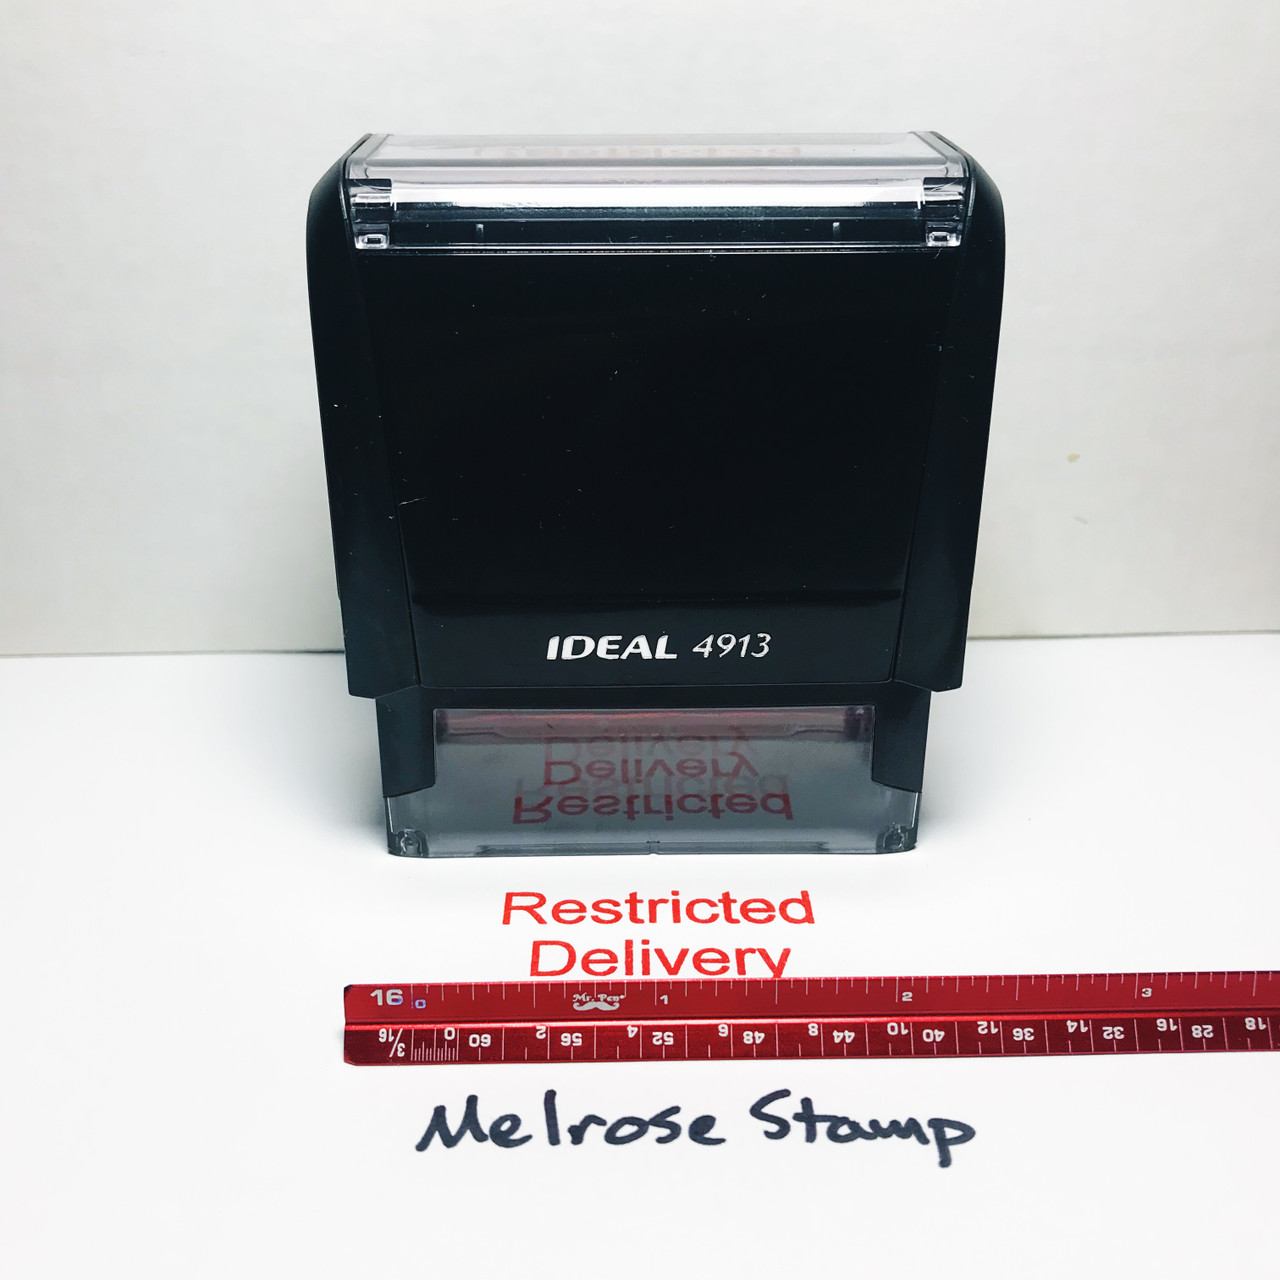 RESTRICTED DELIVERY Rubber Stamp for mail use self-inking